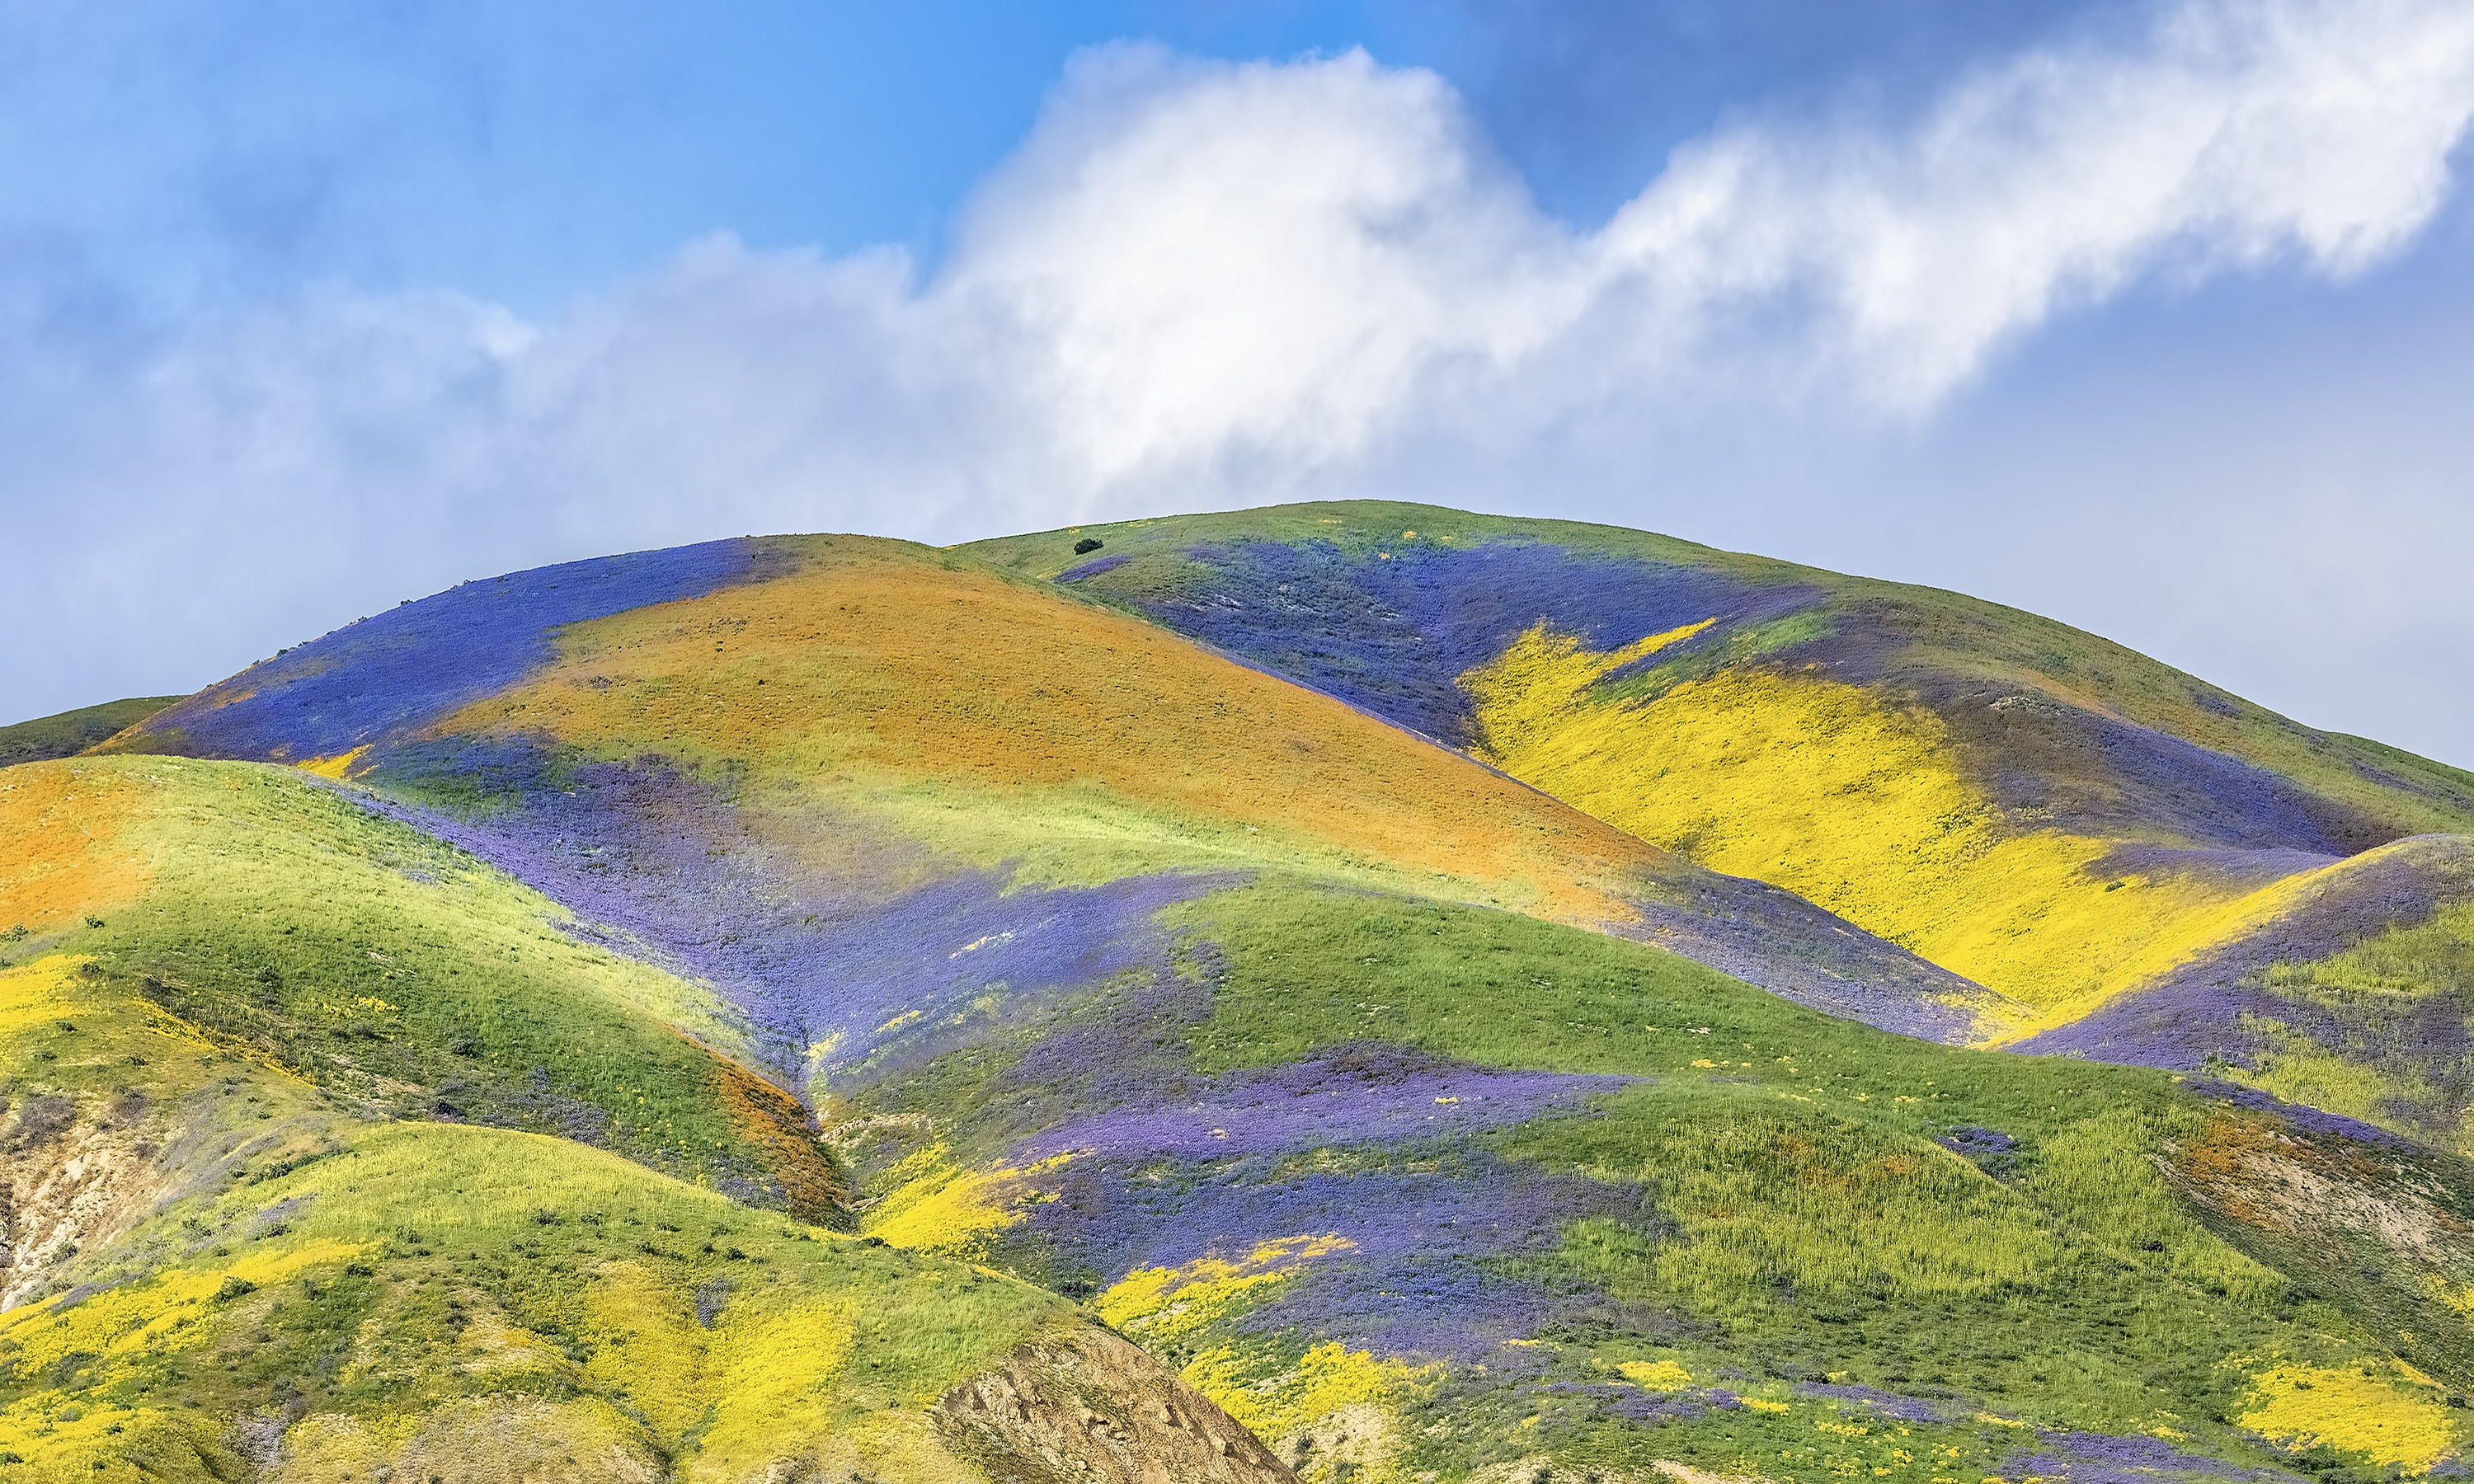 Carrizo Plain National Monument Supported by Thousands Along Central Coast